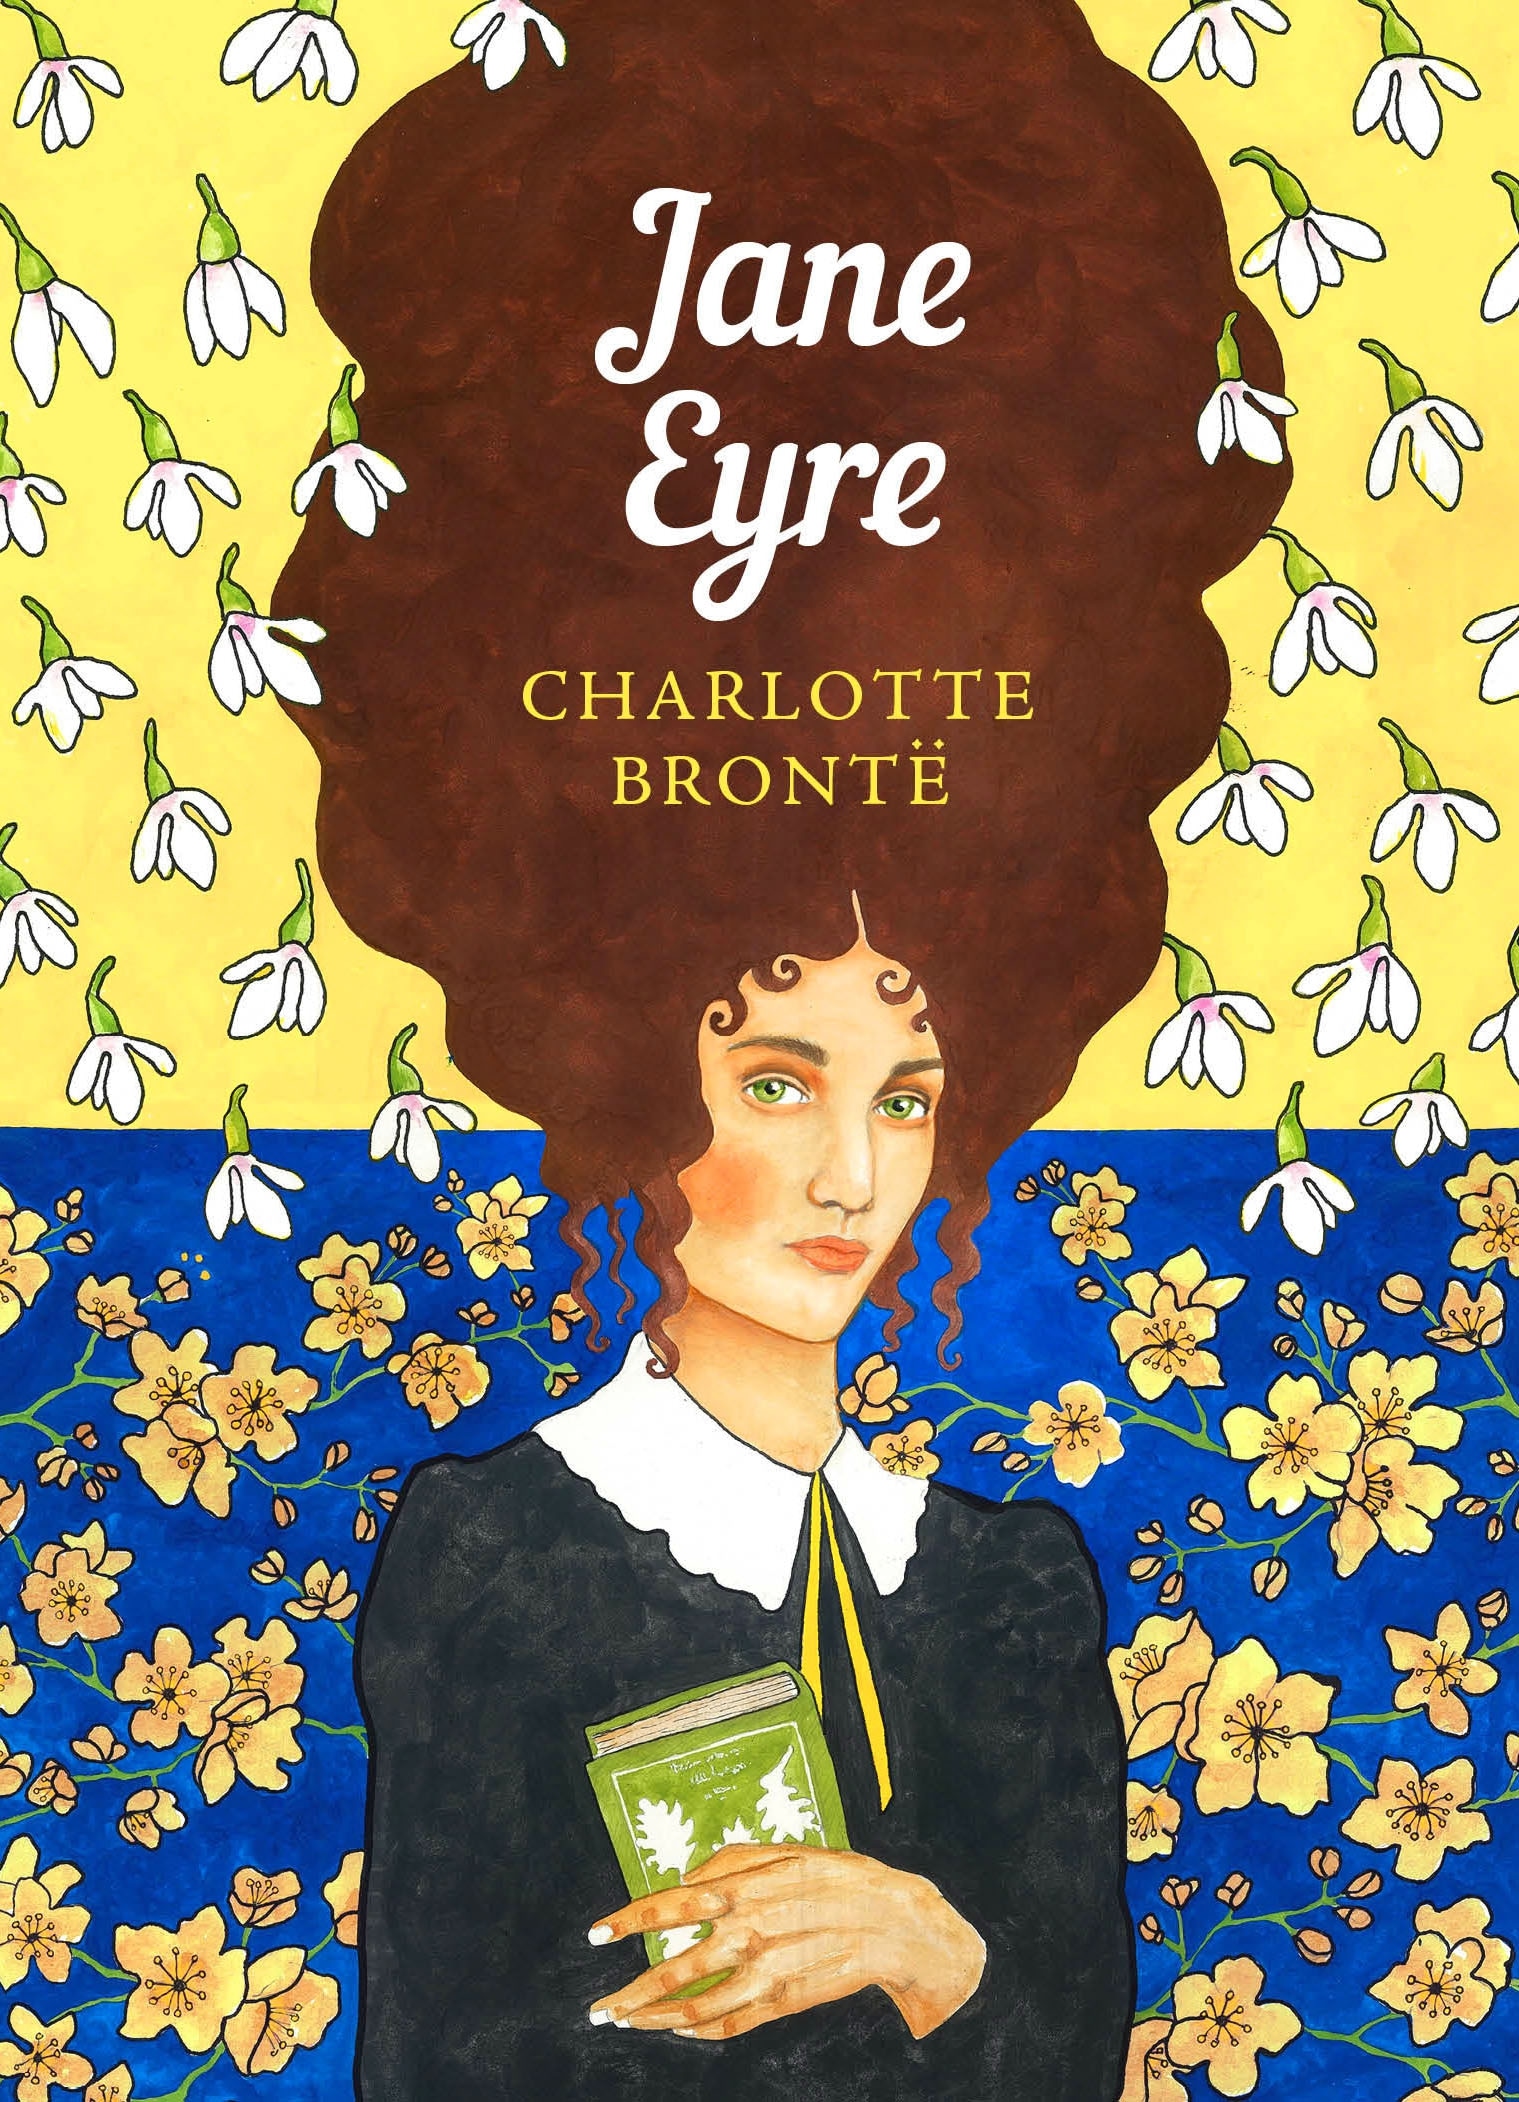 Book “Jane Eyre” by Charlotte Bronte — March 3, 2022